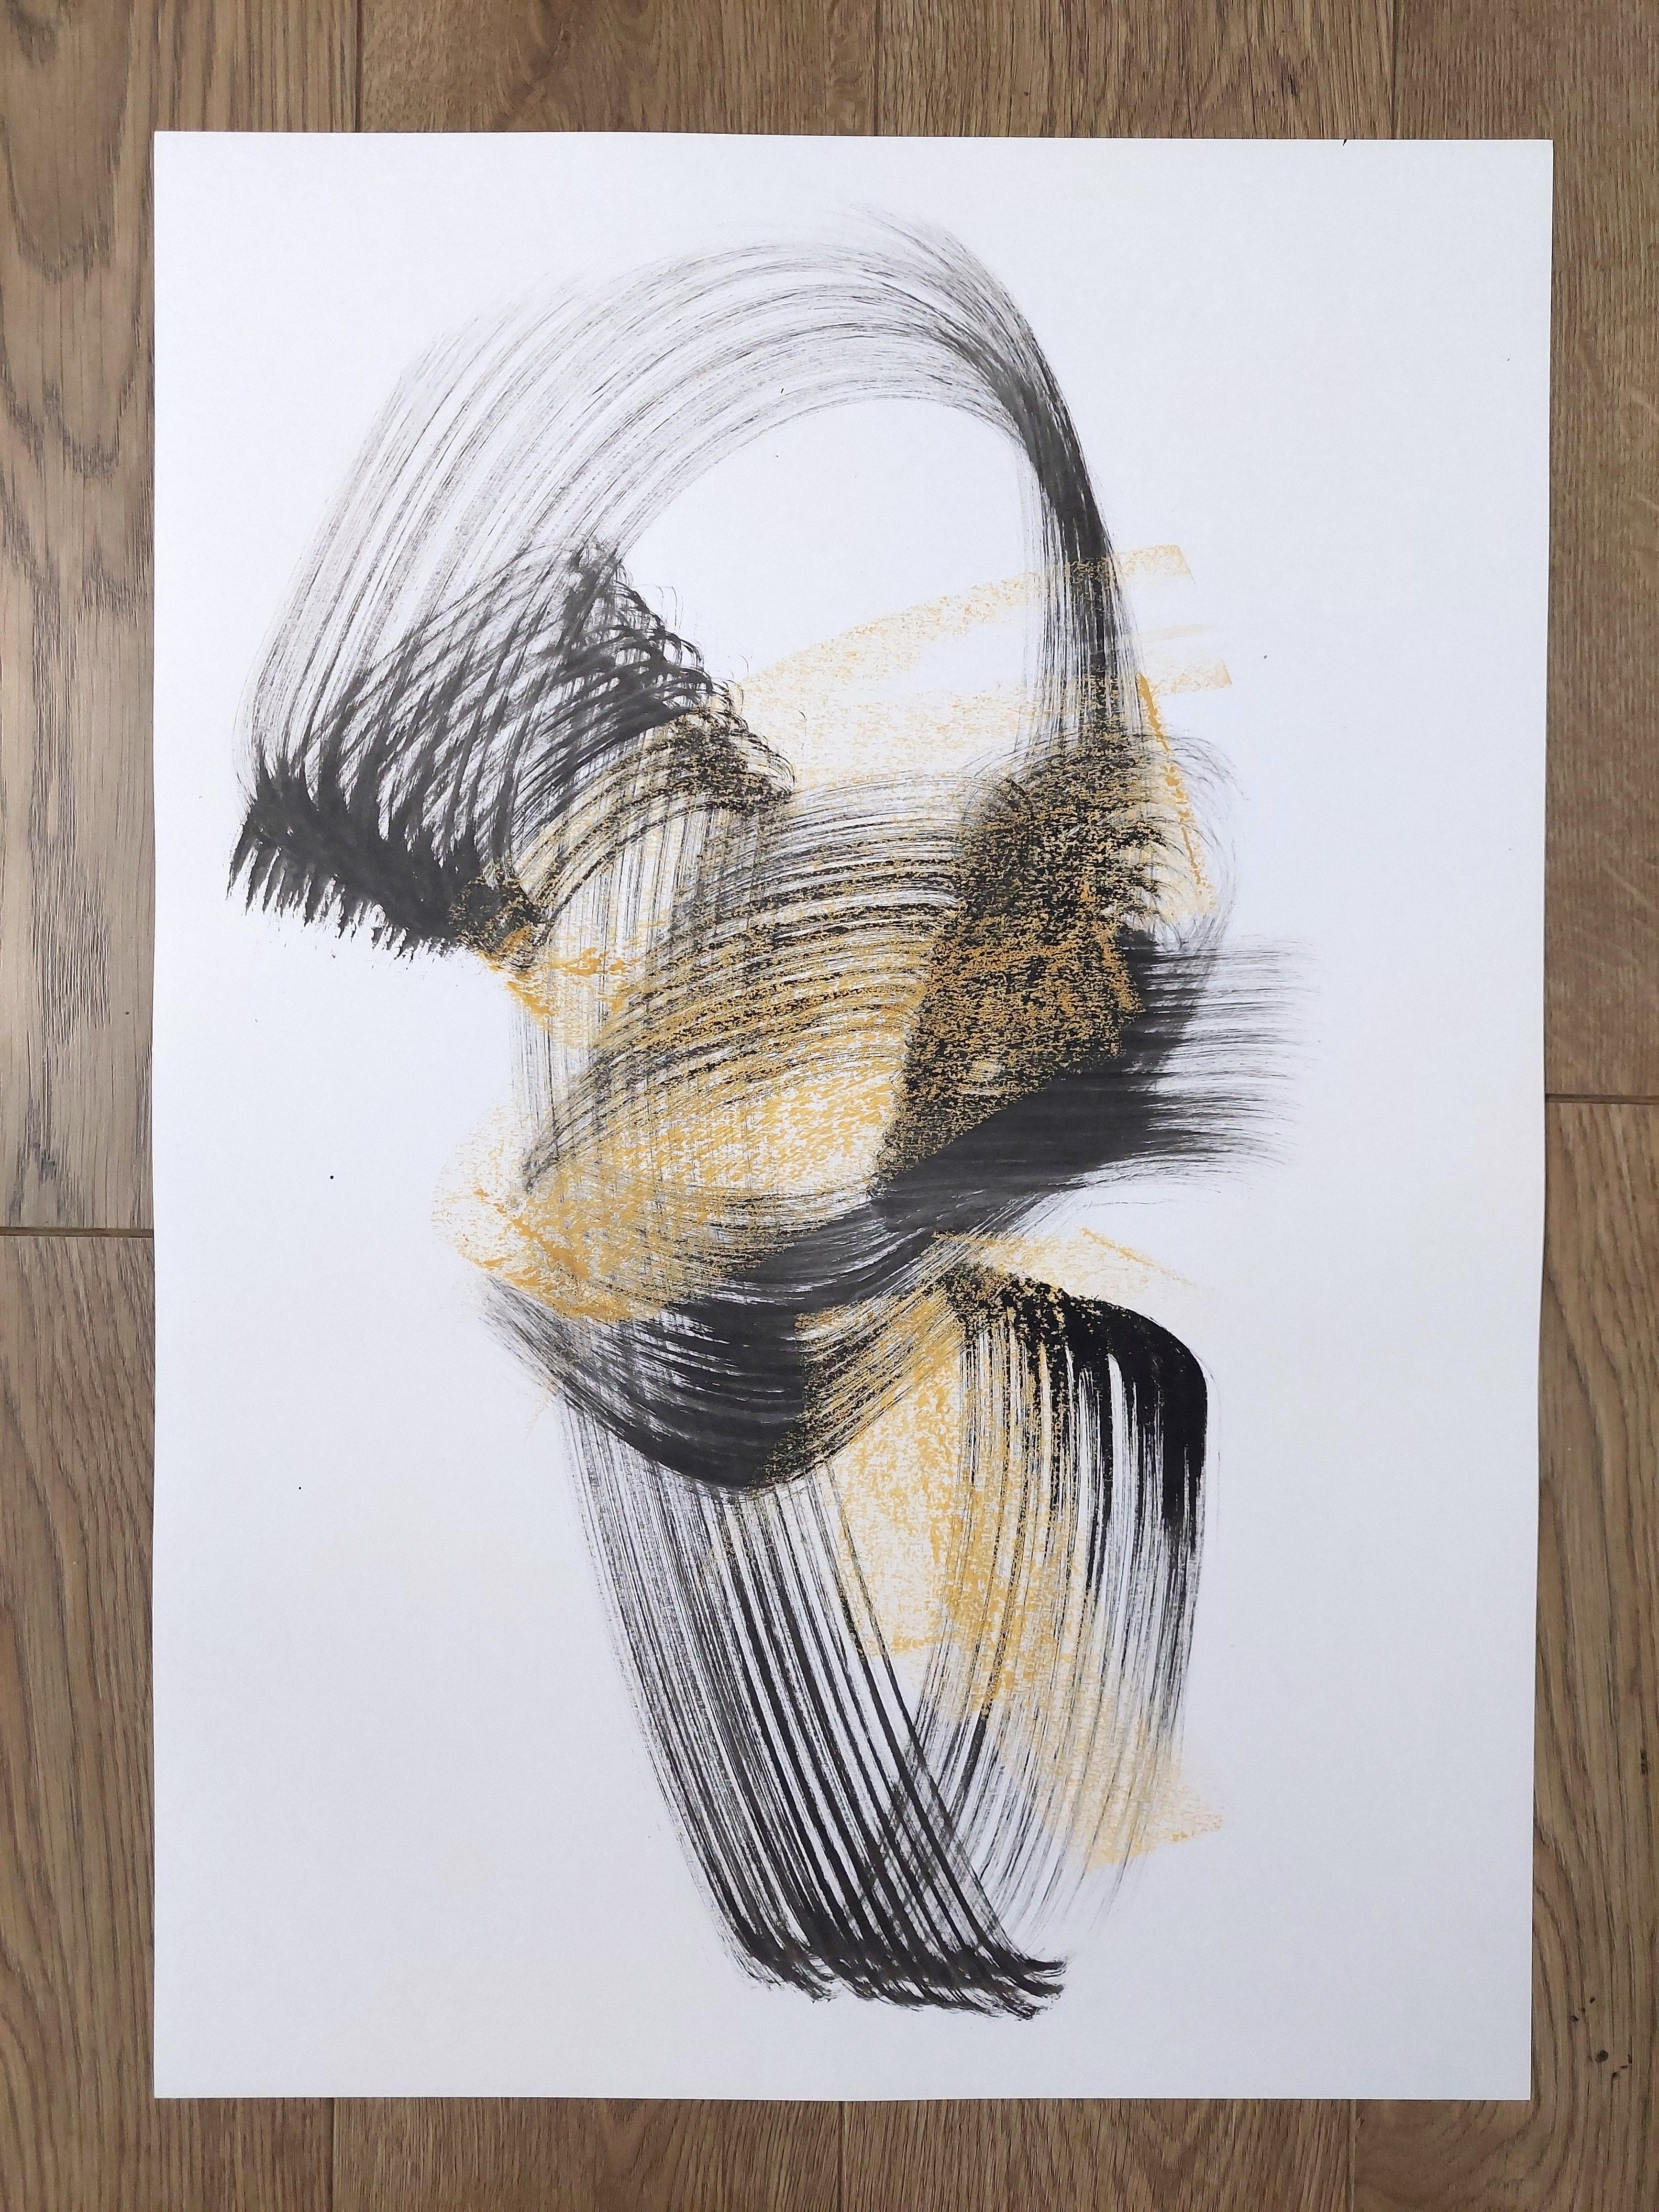 Abstract Calligraphic Brush Drawing. Combing Sound - Abstract Expressionist Art by Sve Gri